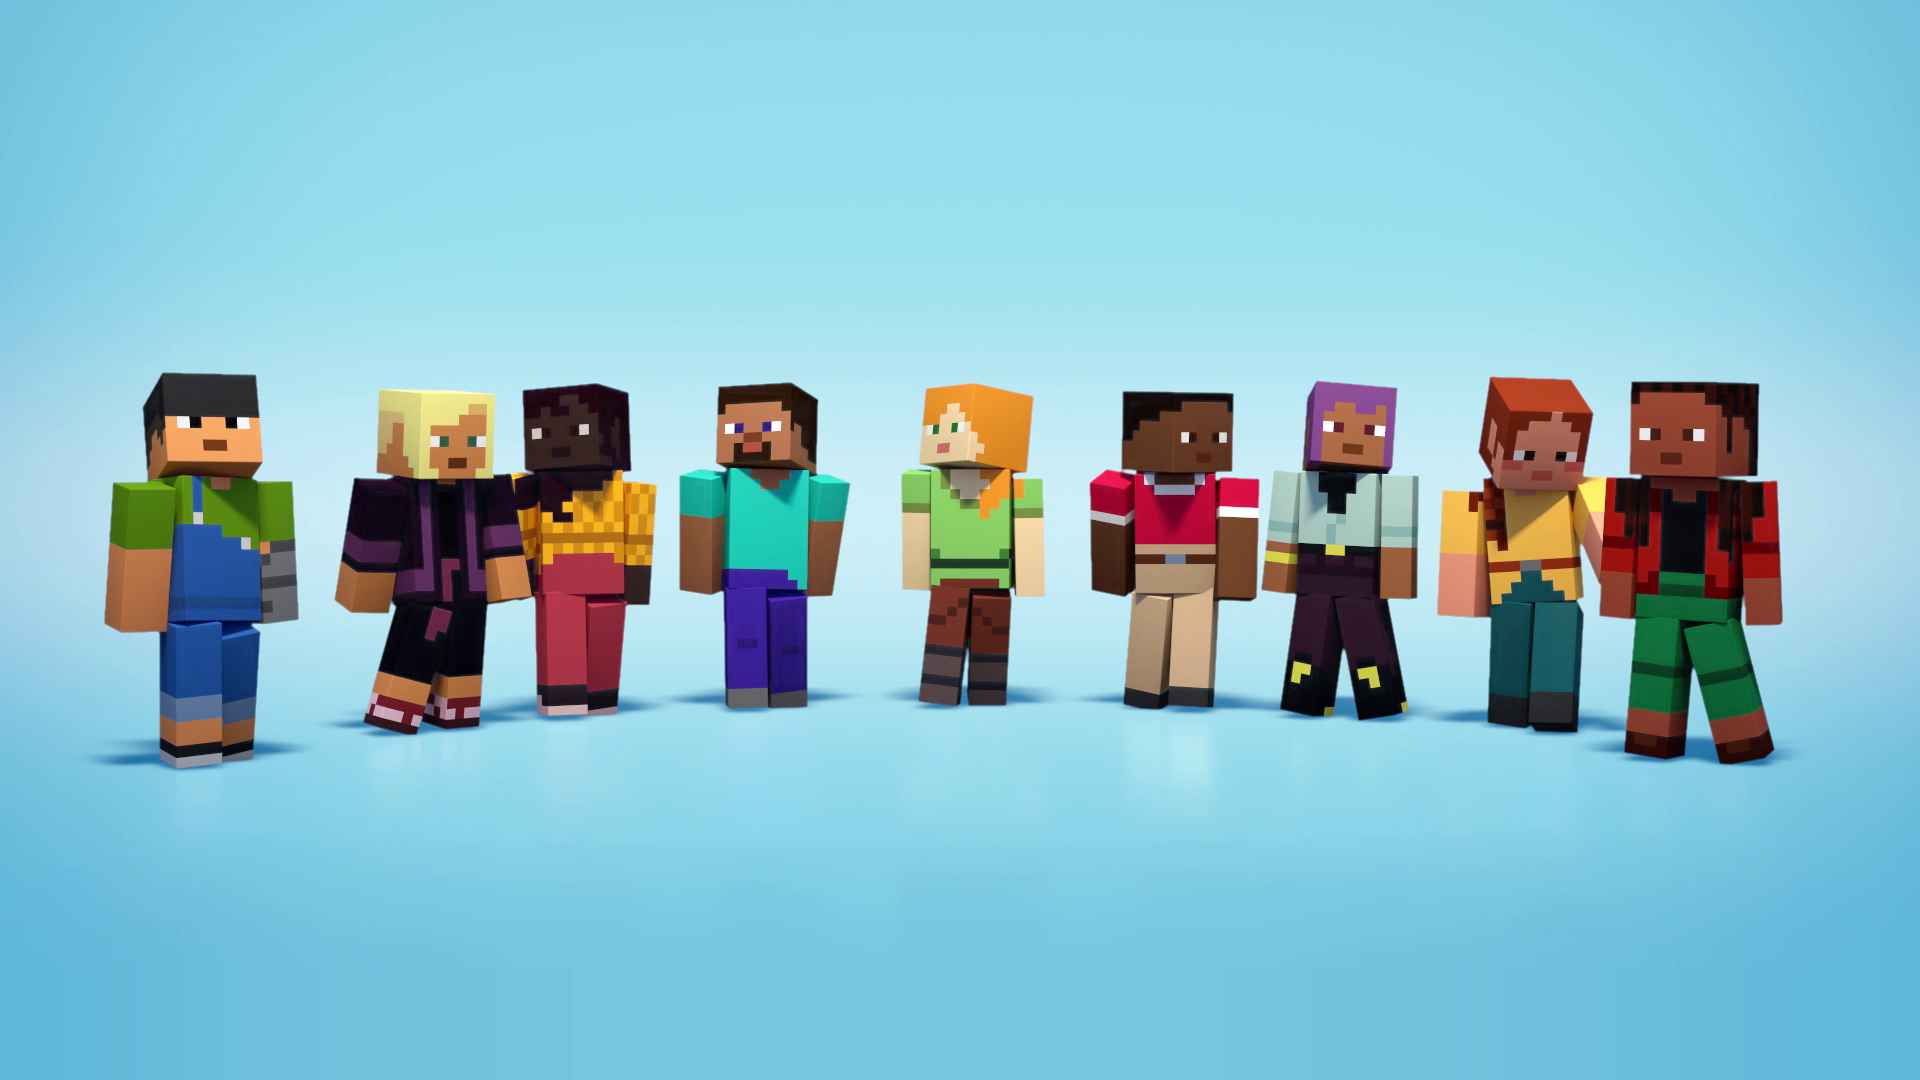 Image of all the new default characters for Minecraft.